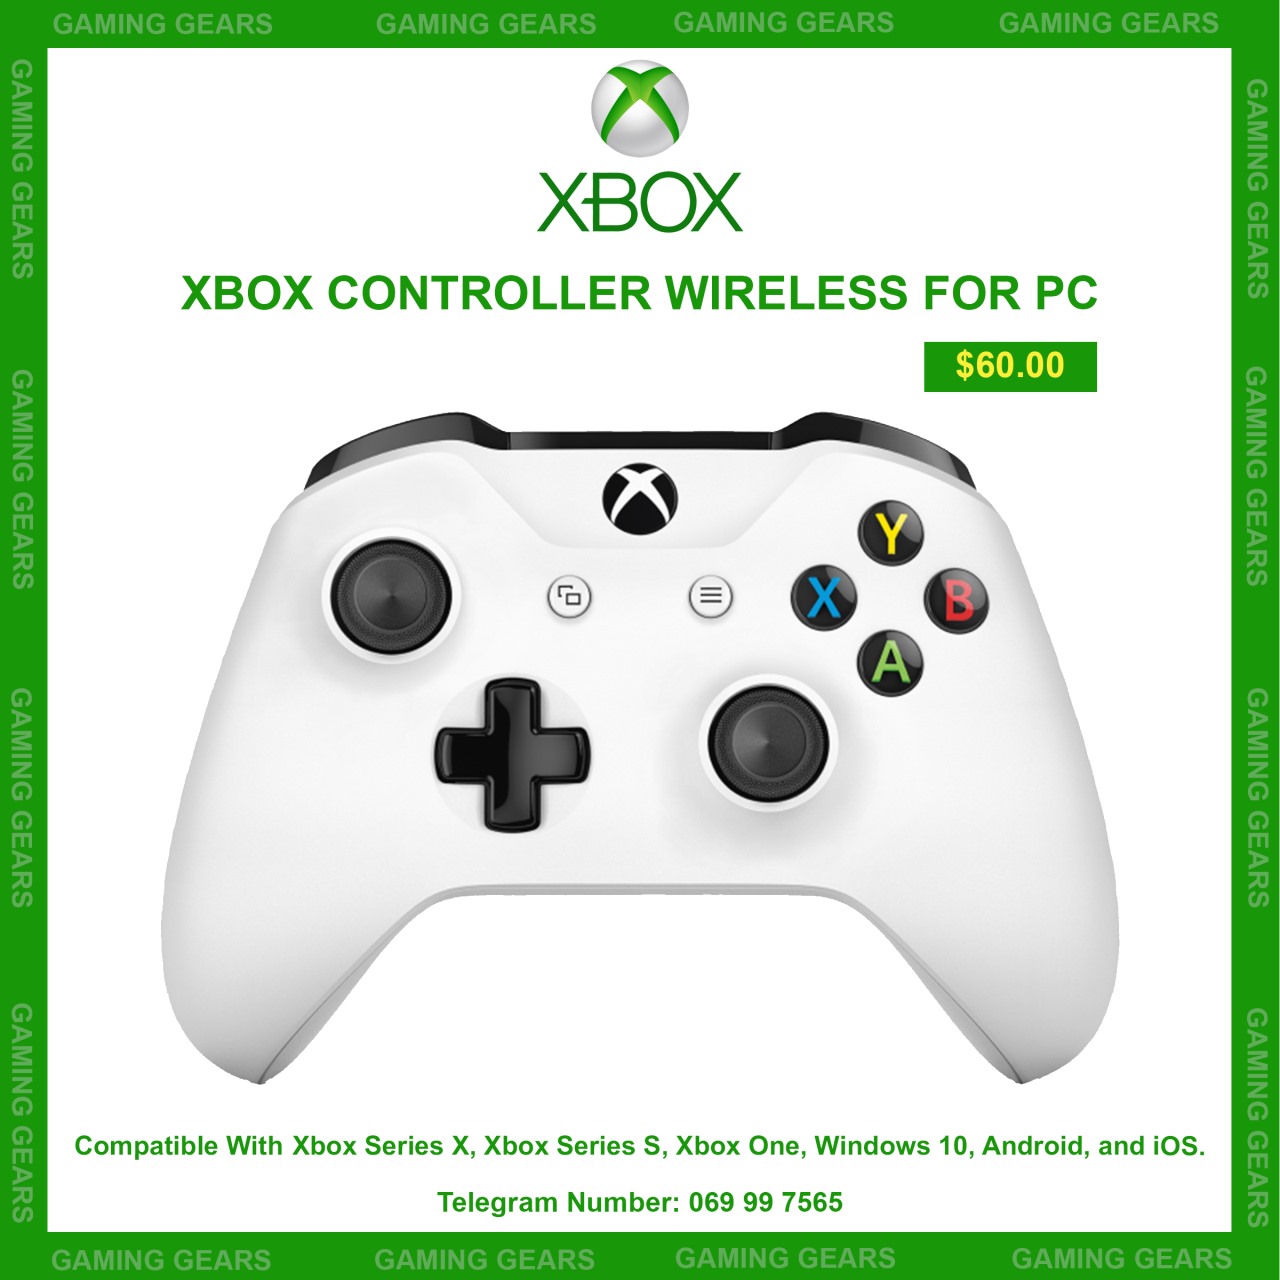 XBOX Controller Wireless for PC